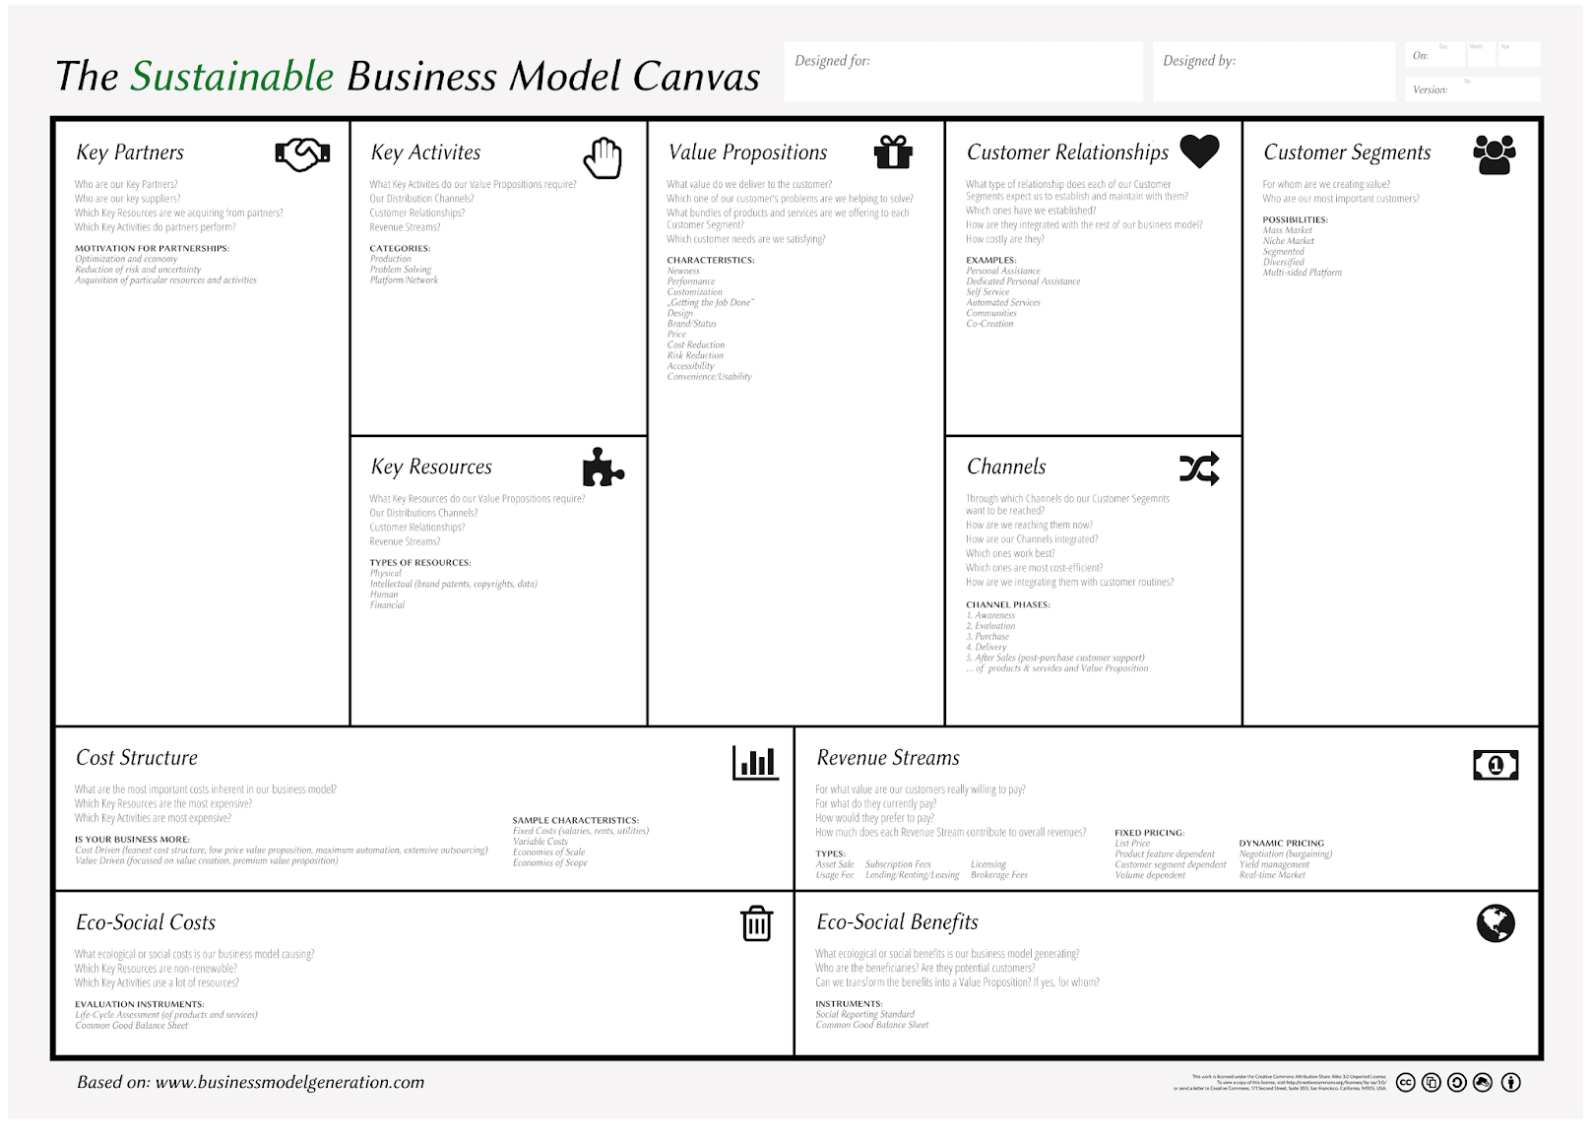 The sustainable business model canvas